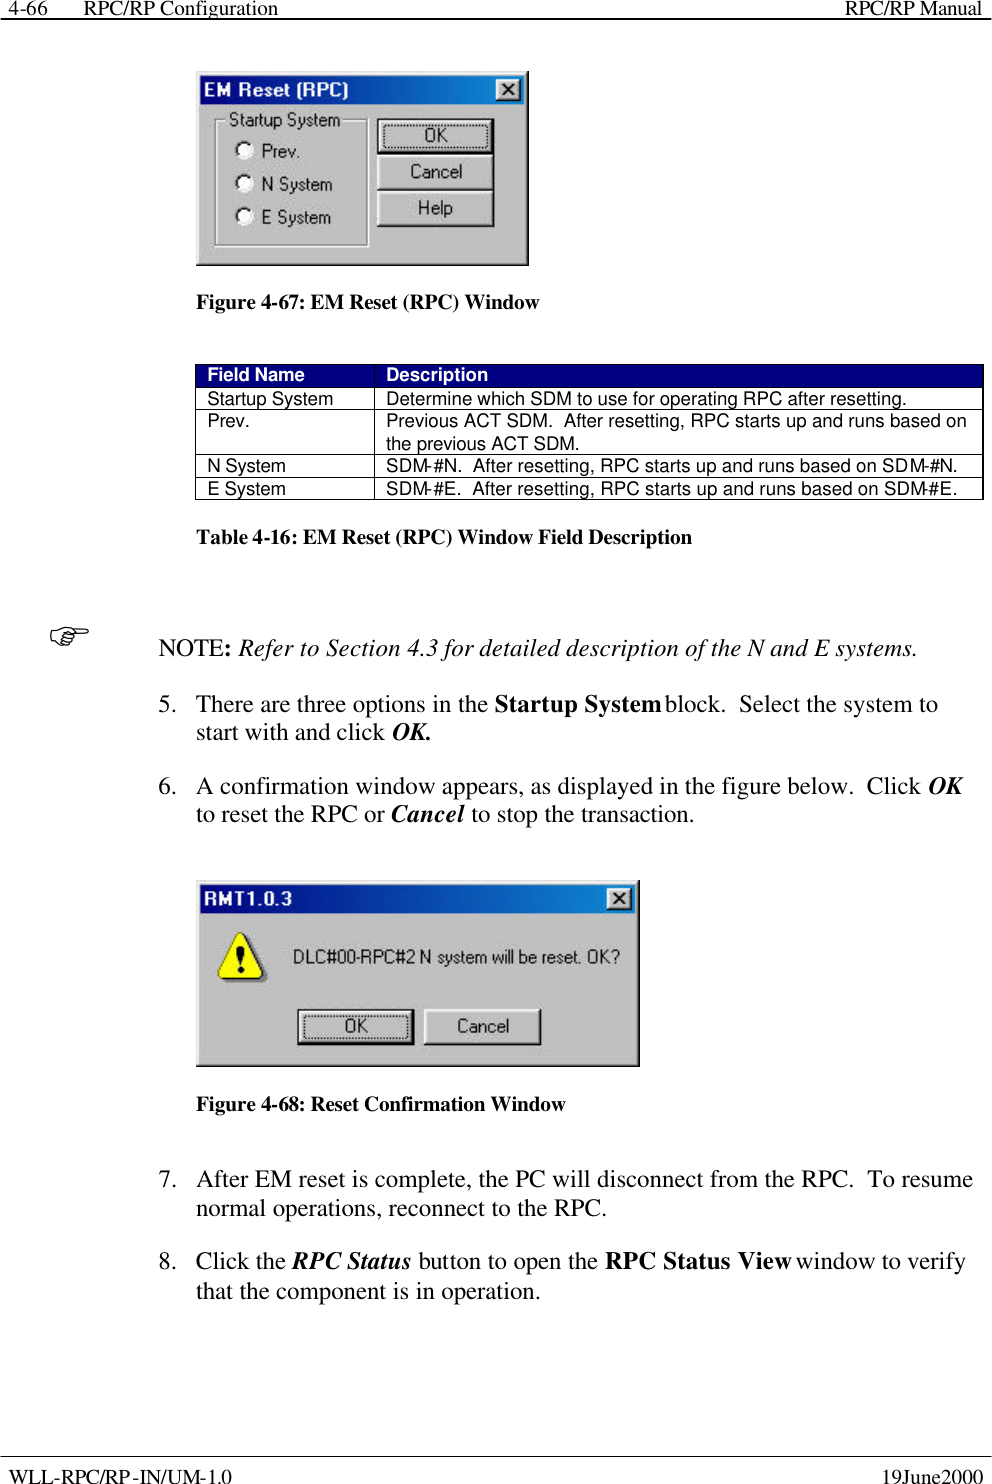  RPC/RP Configuration    RPC/RP Manual   WLL-RPC/RP-IN/UM-1.0    19June2000 4-66 Figure 4-67: EM Reset (RPC) Window Field Name Description Startup System Determine which SDM to use for operating RPC after resetting. Prev. Previous ACT SDM.  After resetting, RPC starts up and runs based on the previous ACT SDM. N System SDM-#N.  After resetting, RPC starts up and runs based on SDM-#N. E System SDM-#E.  After resetting, RPC starts up and runs based on SDM-#E. Table 4-16: EM Reset (RPC) Window Field Description F NOTE: Refer to Section 4.3 for detailed description of the N and E systems. 5.  There are three options in the Startup System block.  Select the system to start with and click OK.   6.  A confirmation window appears, as displayed in the figure below.  Click OK to reset the RPC or Cancel to stop the transaction.  Figure 4-68: Reset Confirmation Window 7.  After EM reset is complete, the PC will disconnect from the RPC.  To resume normal operations, reconnect to the RPC. 8.  Click the RPC Status button to open the RPC Status View window to verify that the component is in operation. 